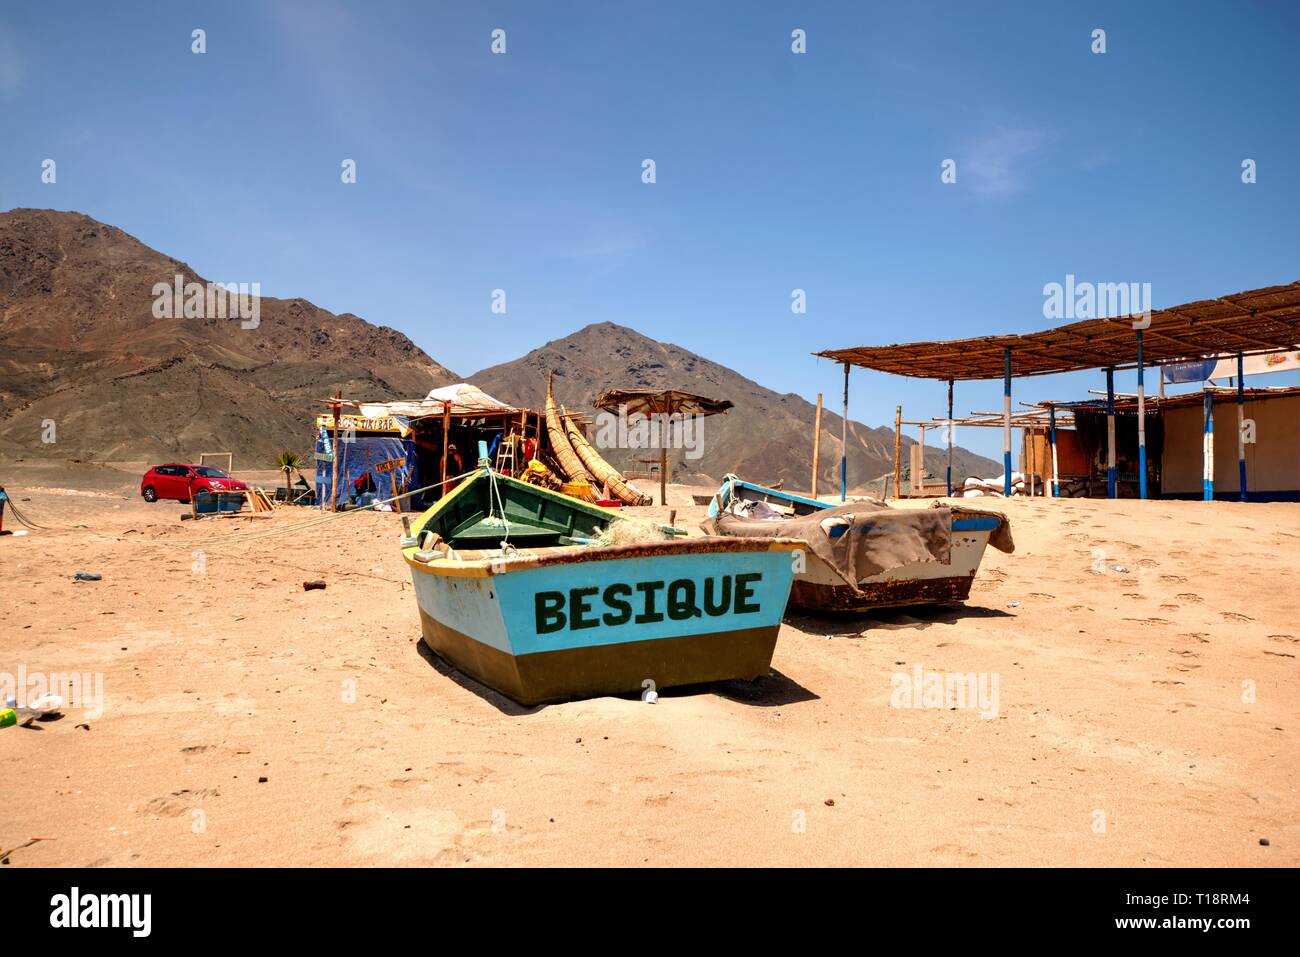 Chimbote, Peru - April 11, 2018: Beach at Vesique in north Peru with boats on beach Stock Photo